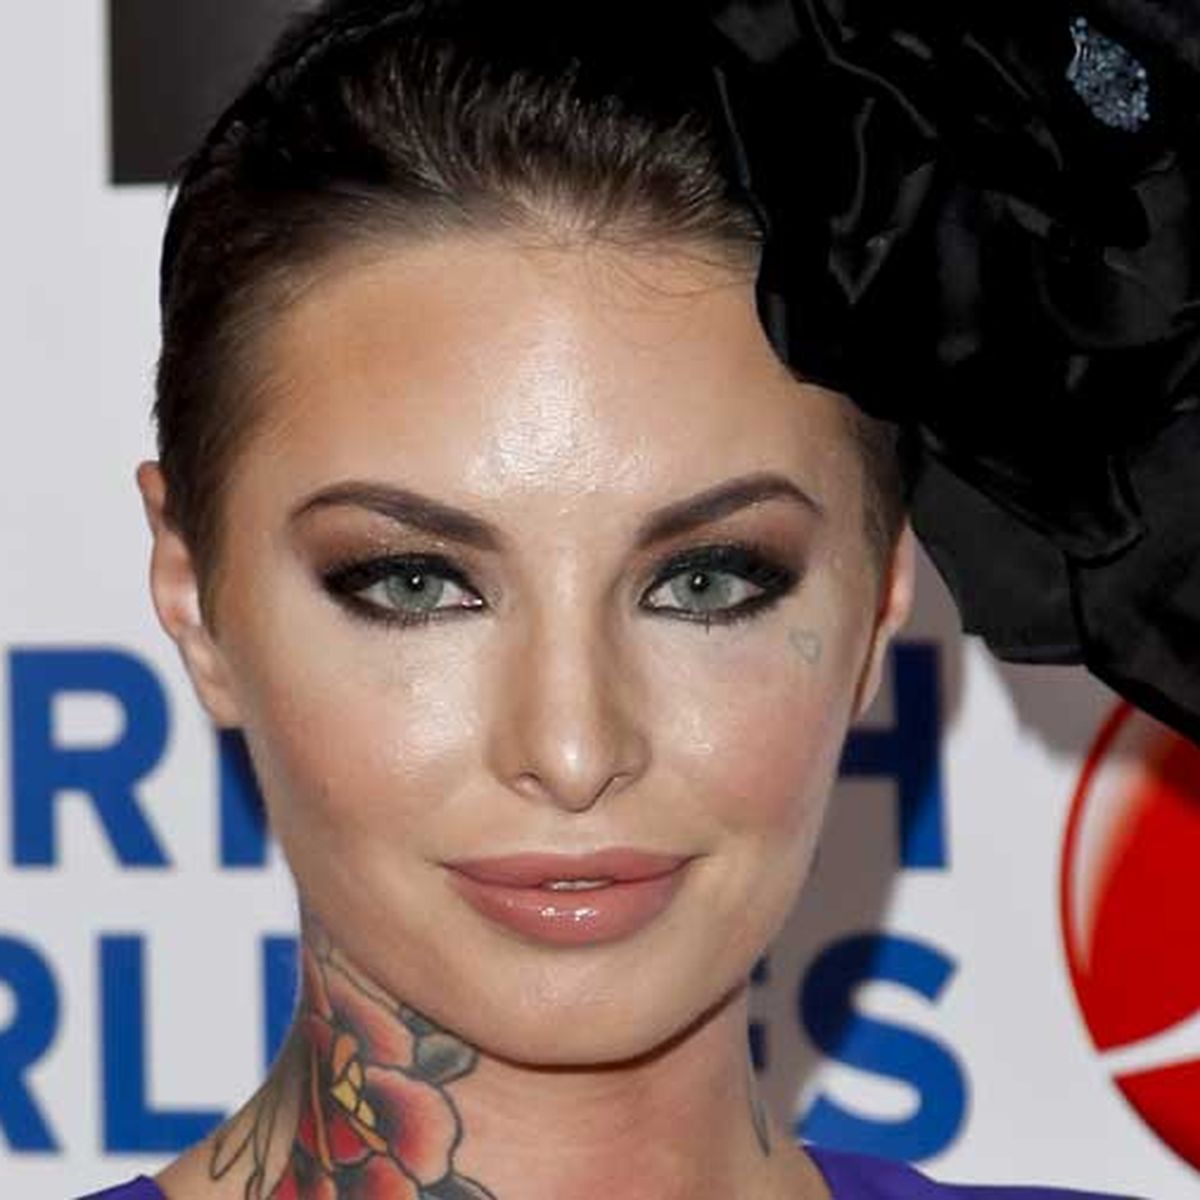 Christy - Christy Mack's first public appearance since alleged War Machine attack